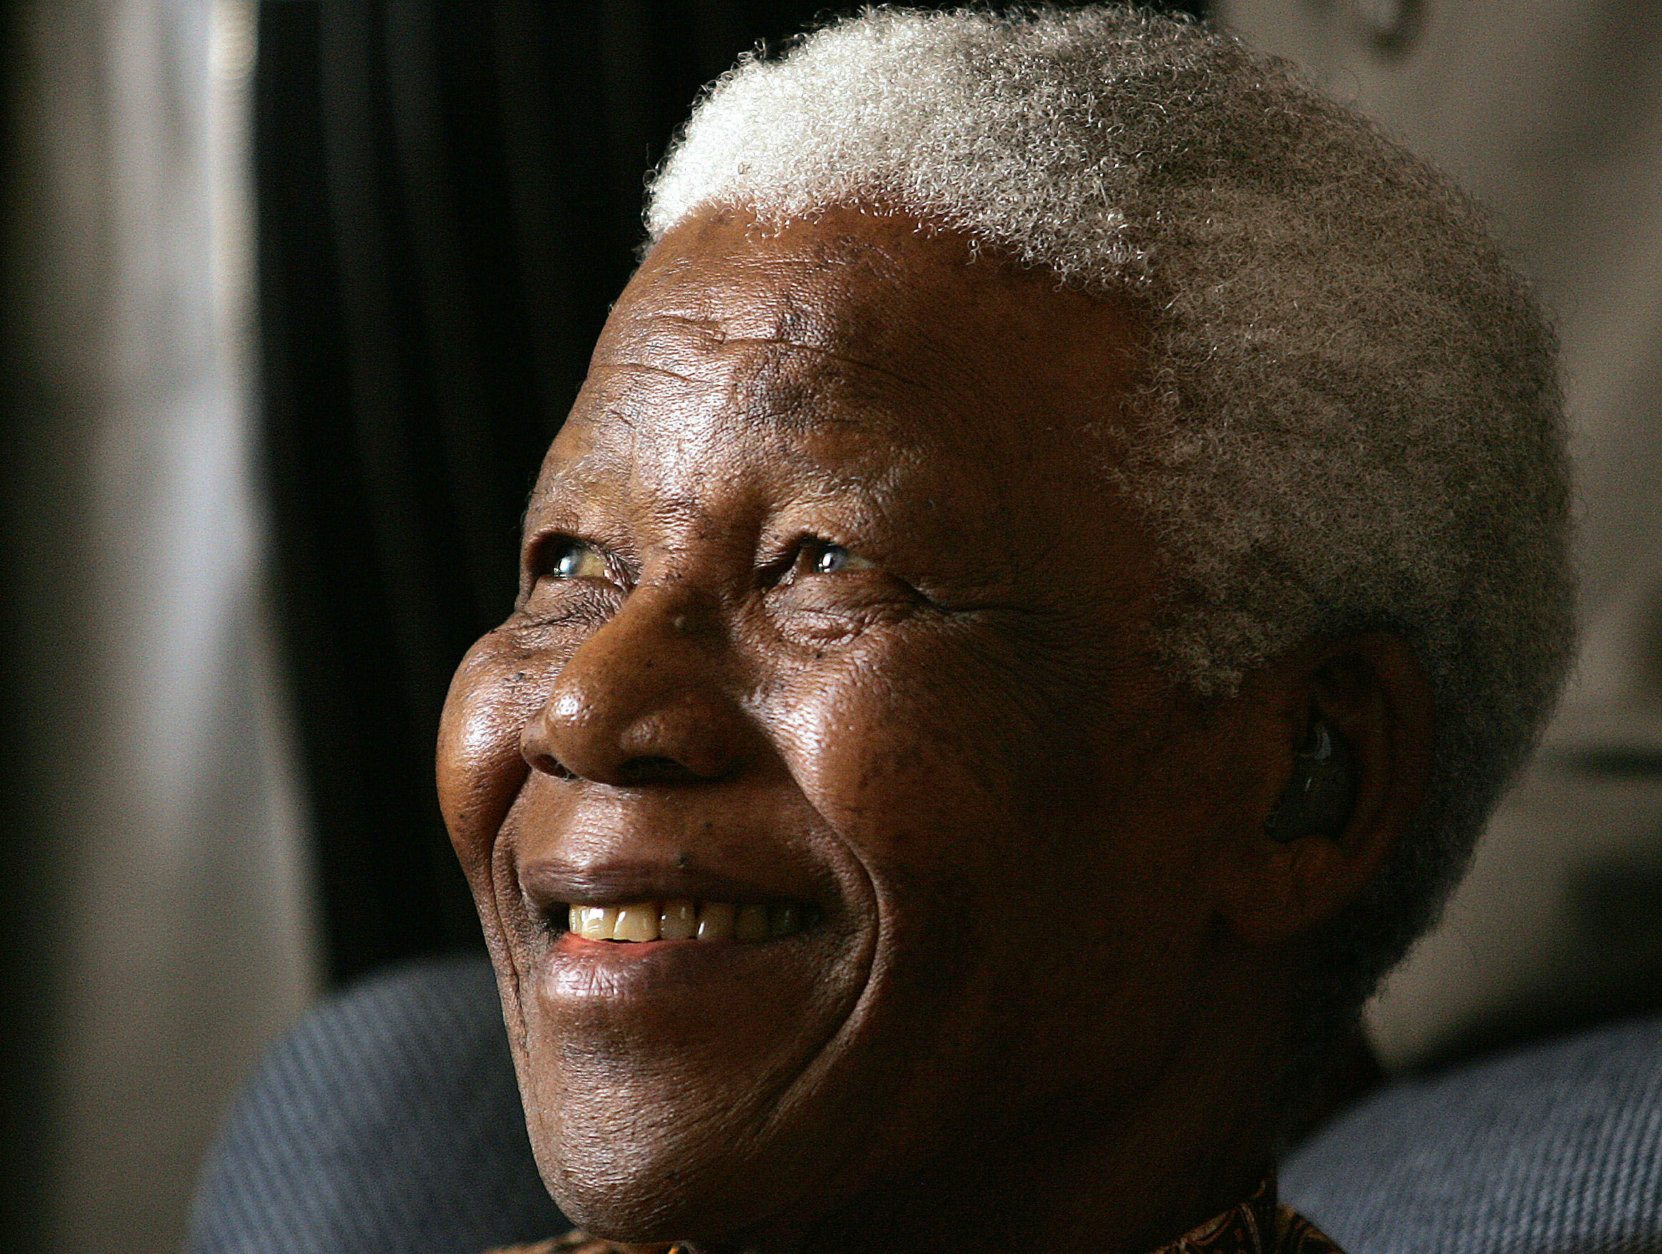 Former South African President Nelson Mandela smiles during his meeting with a group of Mandela Rhodes Scholars for 2006, in Johannesburg, South Africa, Tuesday, Jan. 31, 2006. Mandela, fresh from a two-week holiday in Mauritius,  was in high spirits when he met the 15 students chosen to benefit from a scholarship of which he is the patron. (AP Photo/Themba Hadebe)